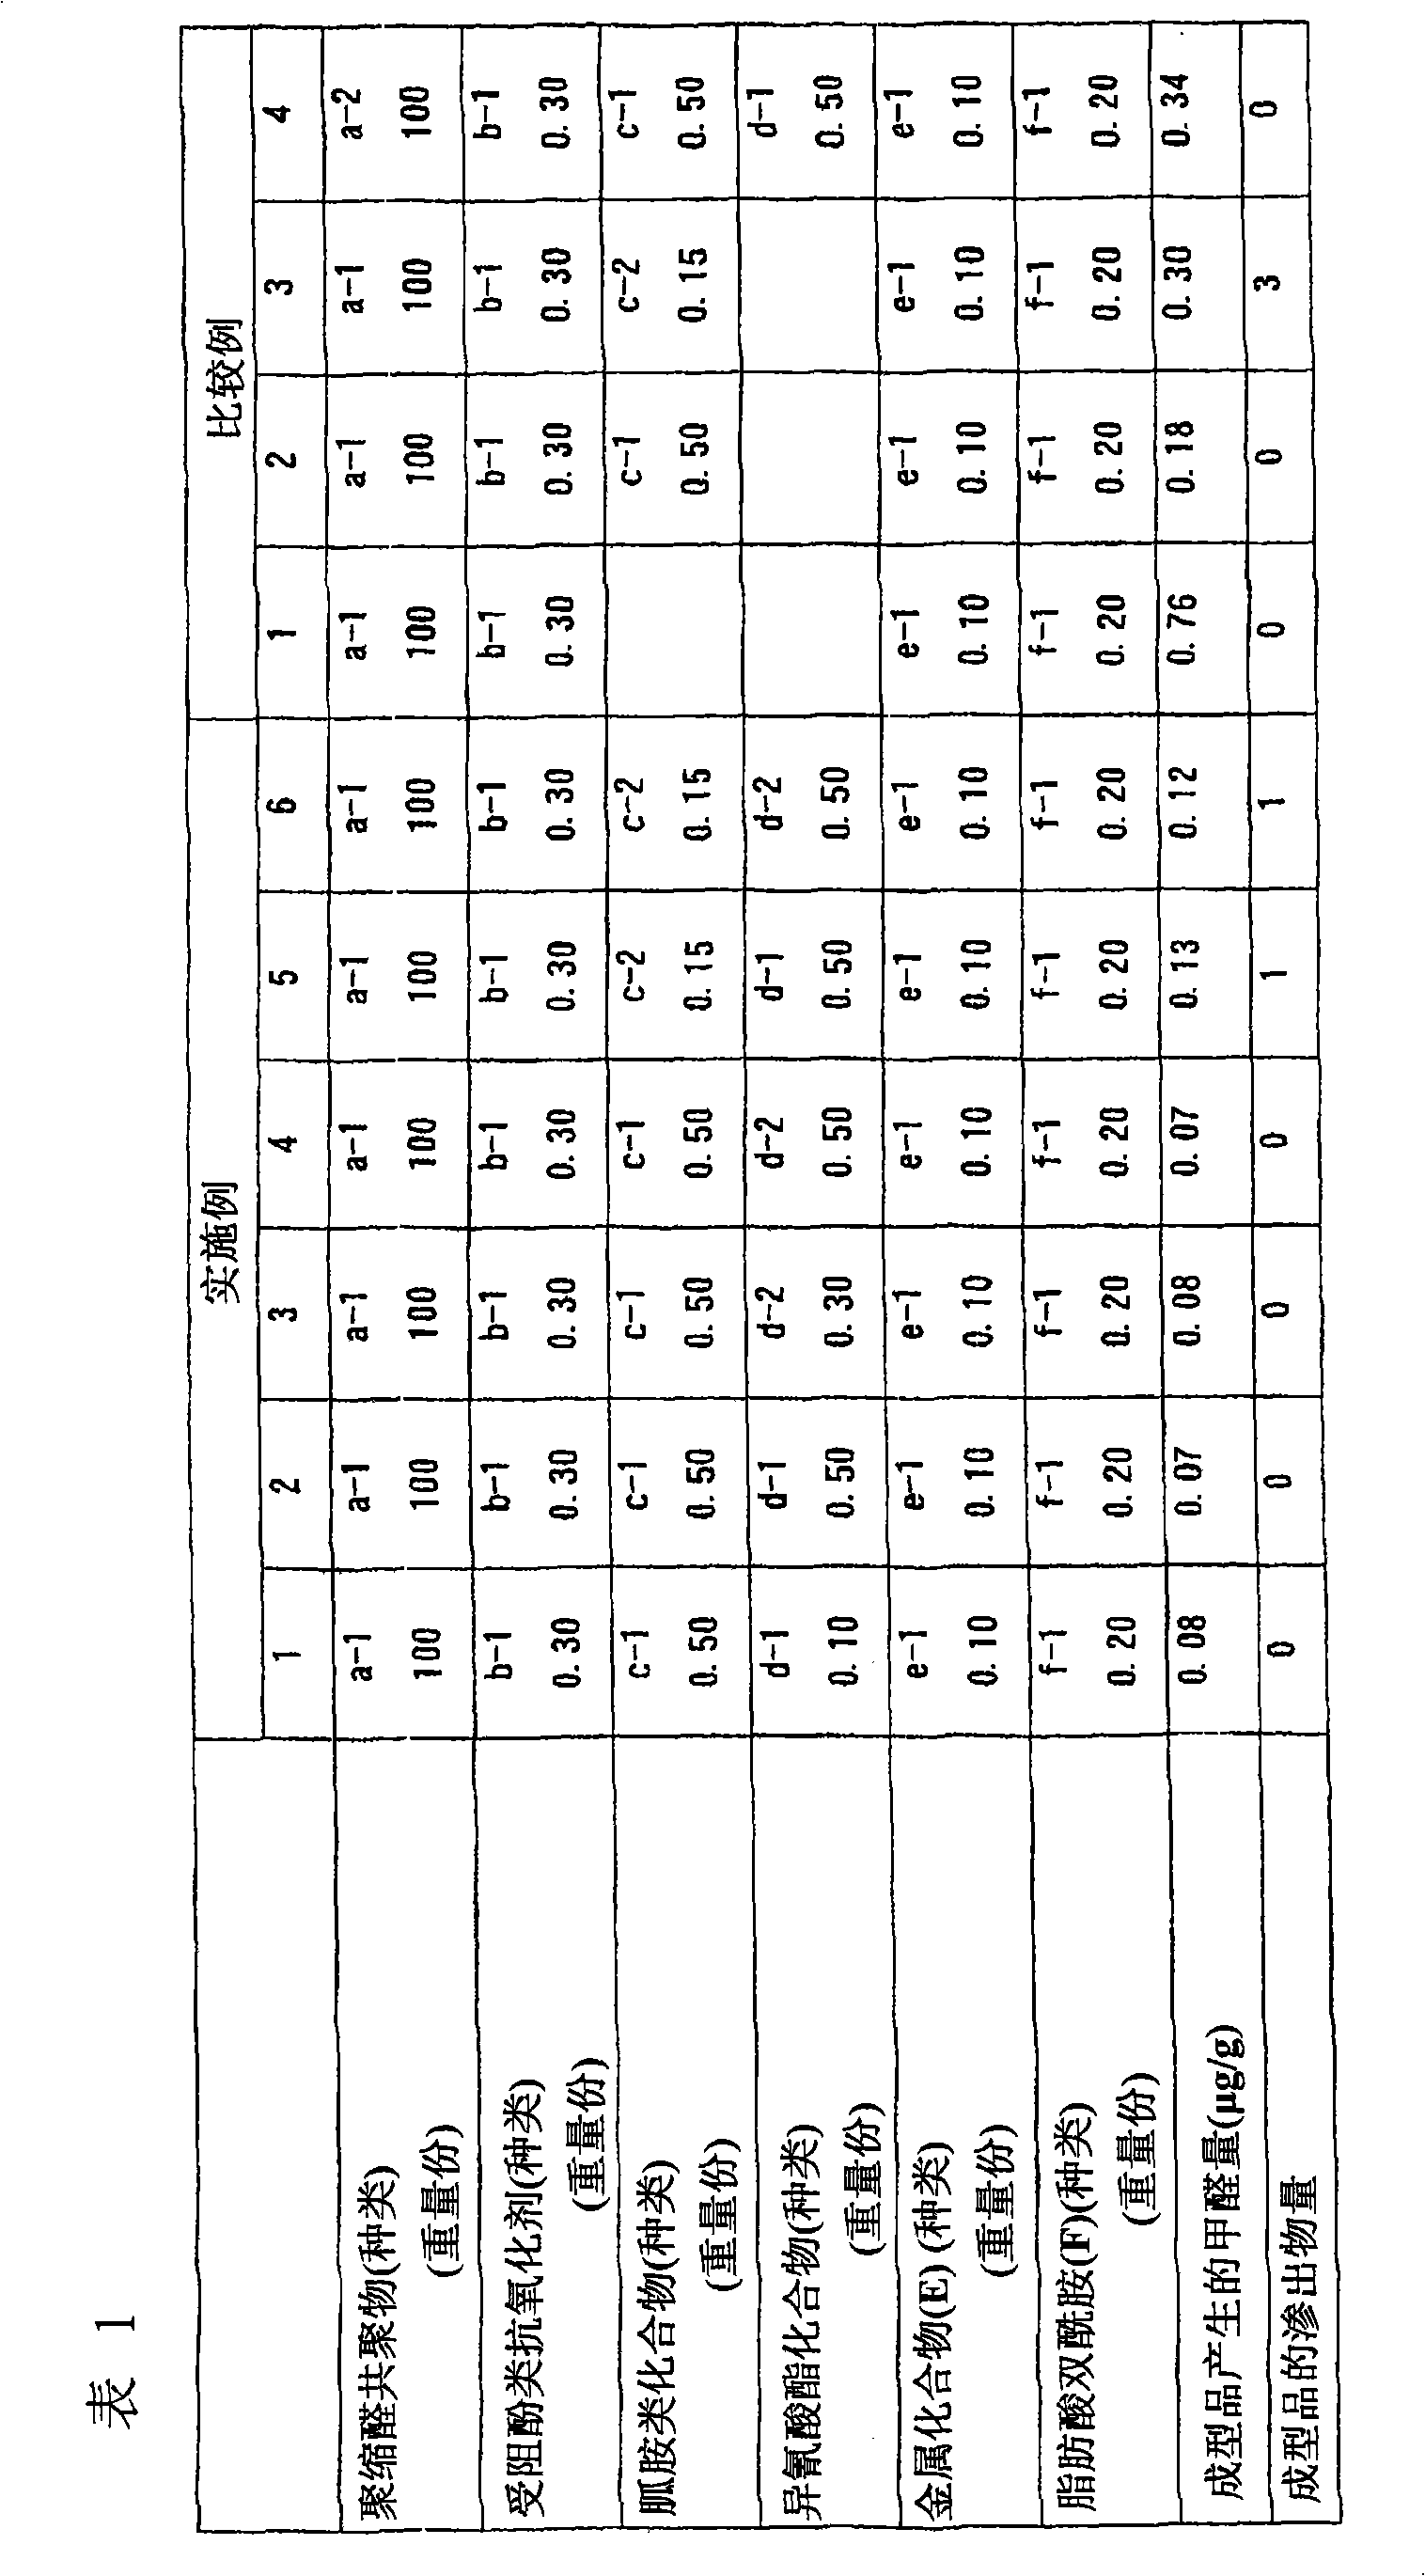 Polyacetal resin composition and molded article thereof